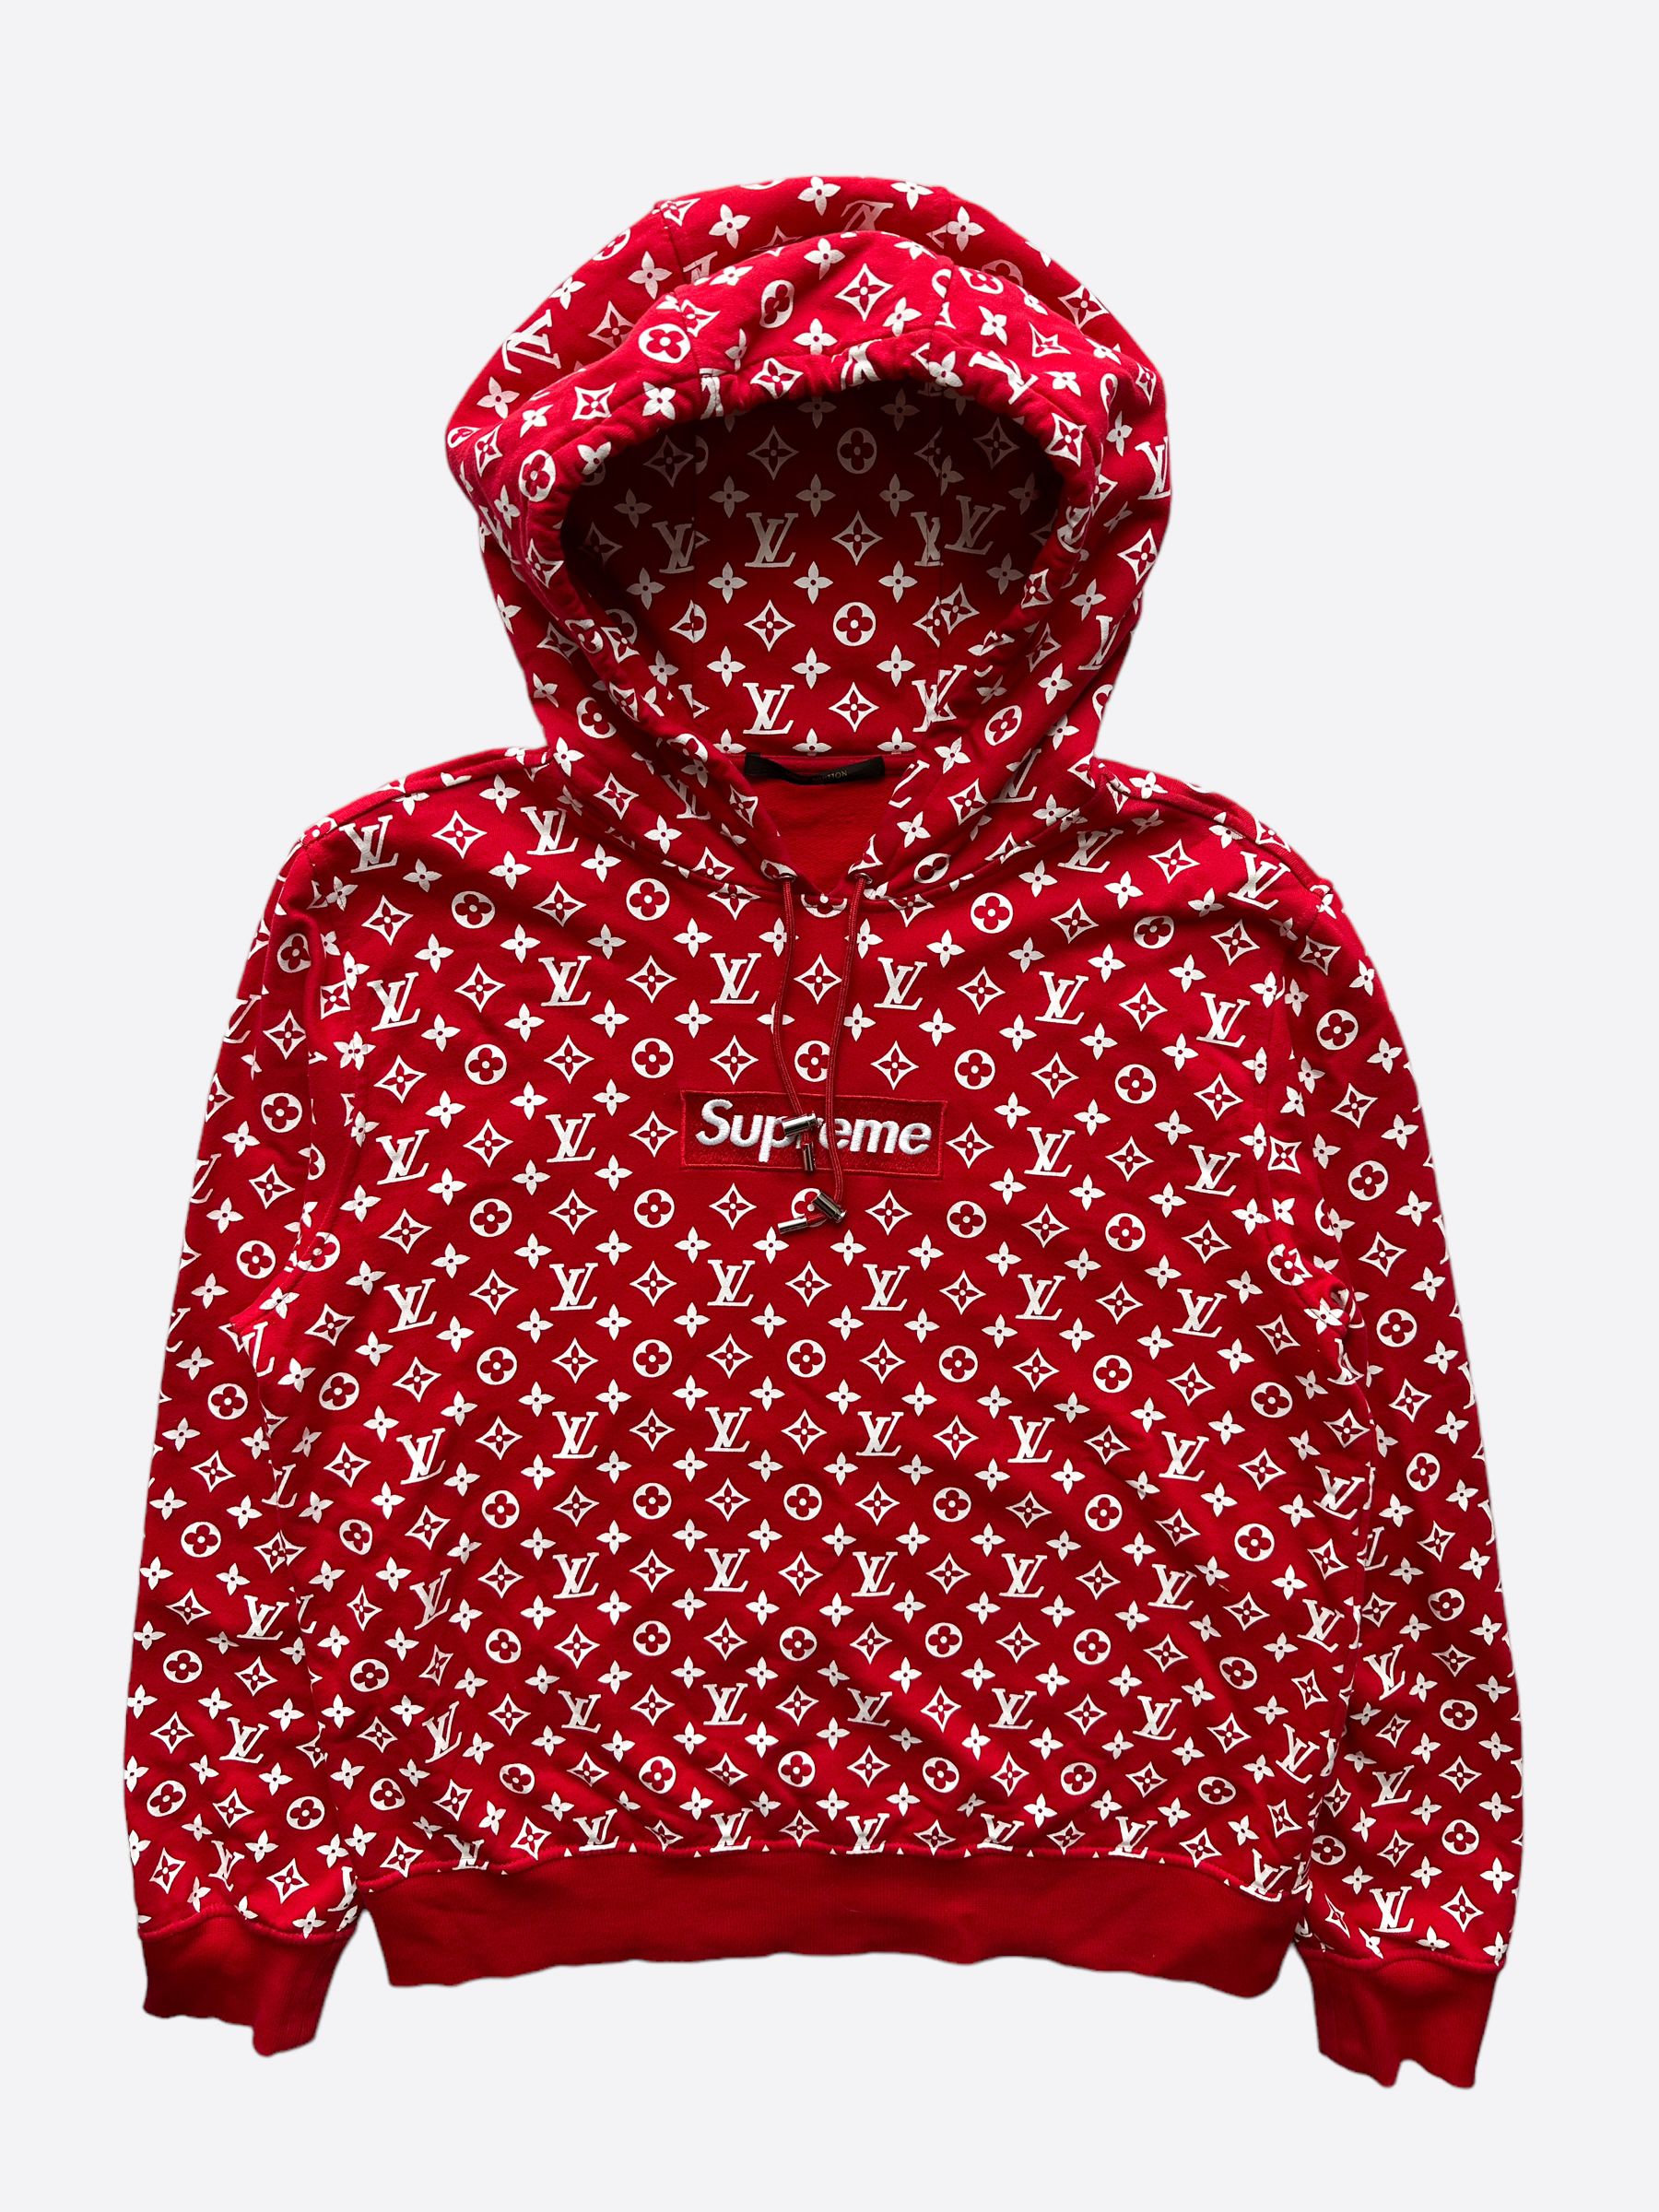 Pre-owned Supreme Lv Box Logo Hoodie Hooded Sweatshirt Sz Xl Rare Authentic  In Red